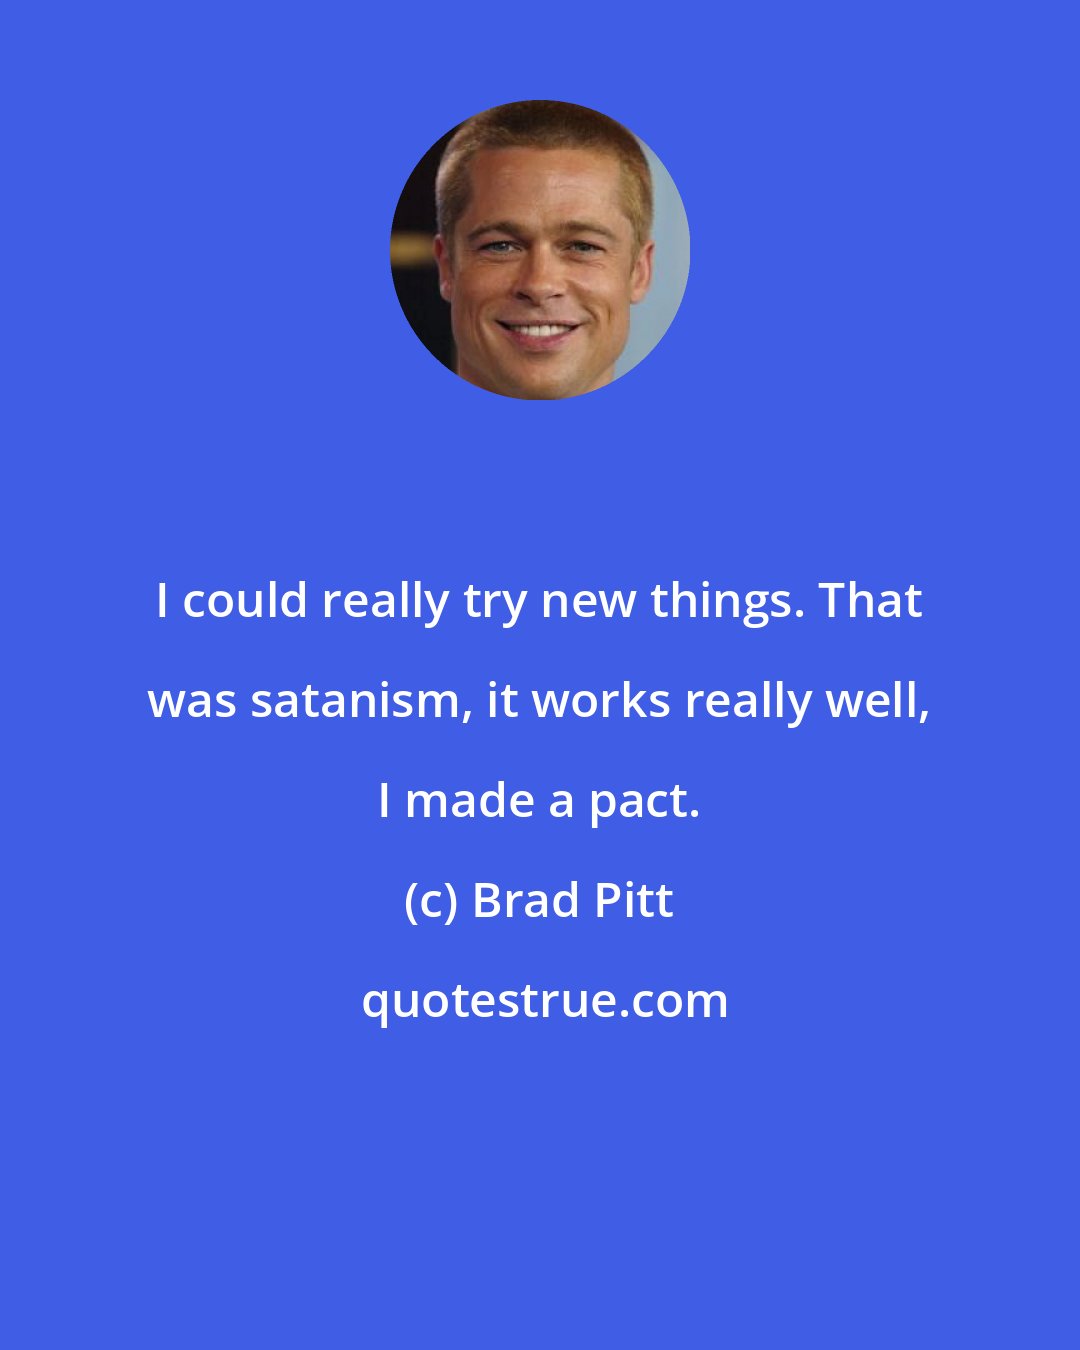 Brad Pitt: I could really try new things. That was satanism, it works really well, I made a pact.